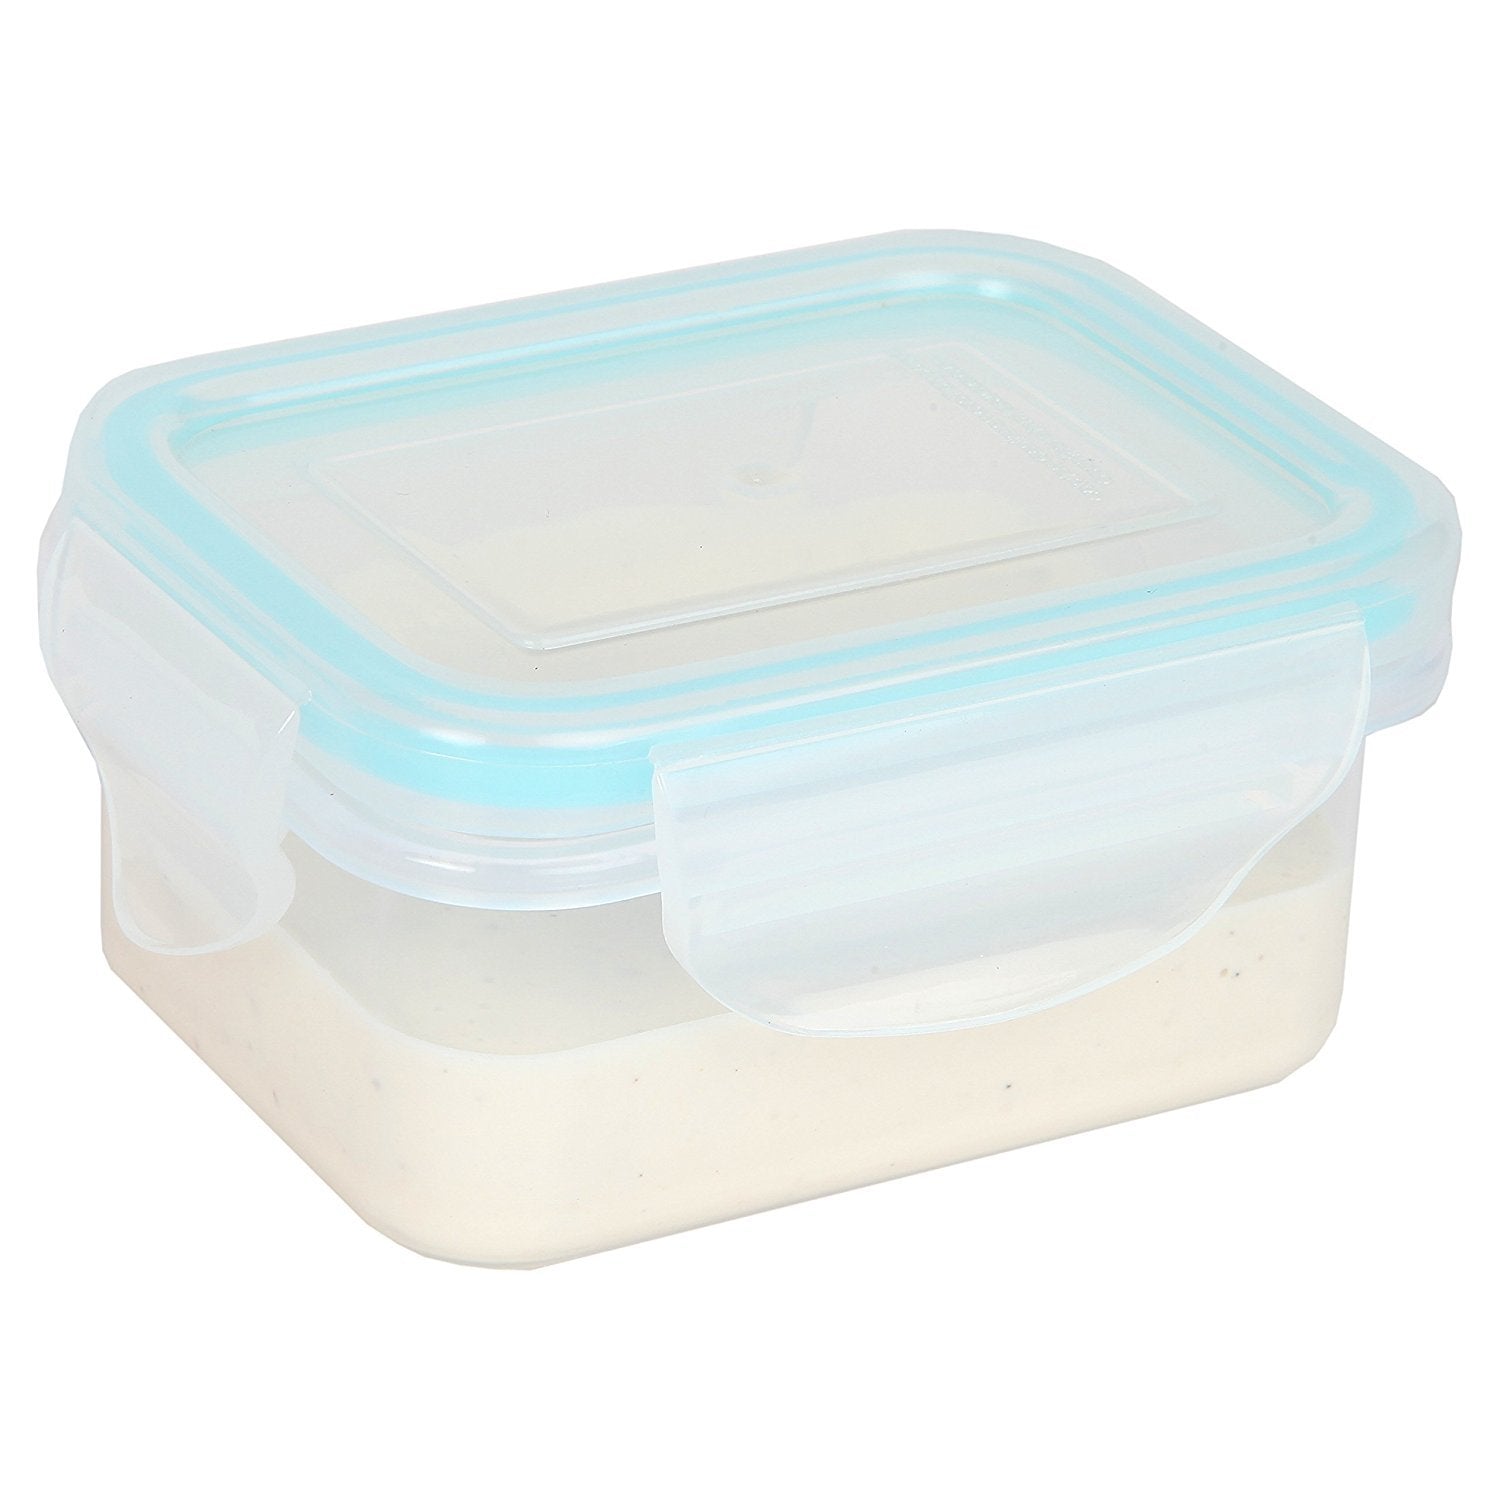 Meal Prep Container Bento Box Adult Lunch Box Set with Lid | Microwave Dishwasher Safe BPA Free Heavy Duty Food Storage Containers Reusable Plastic